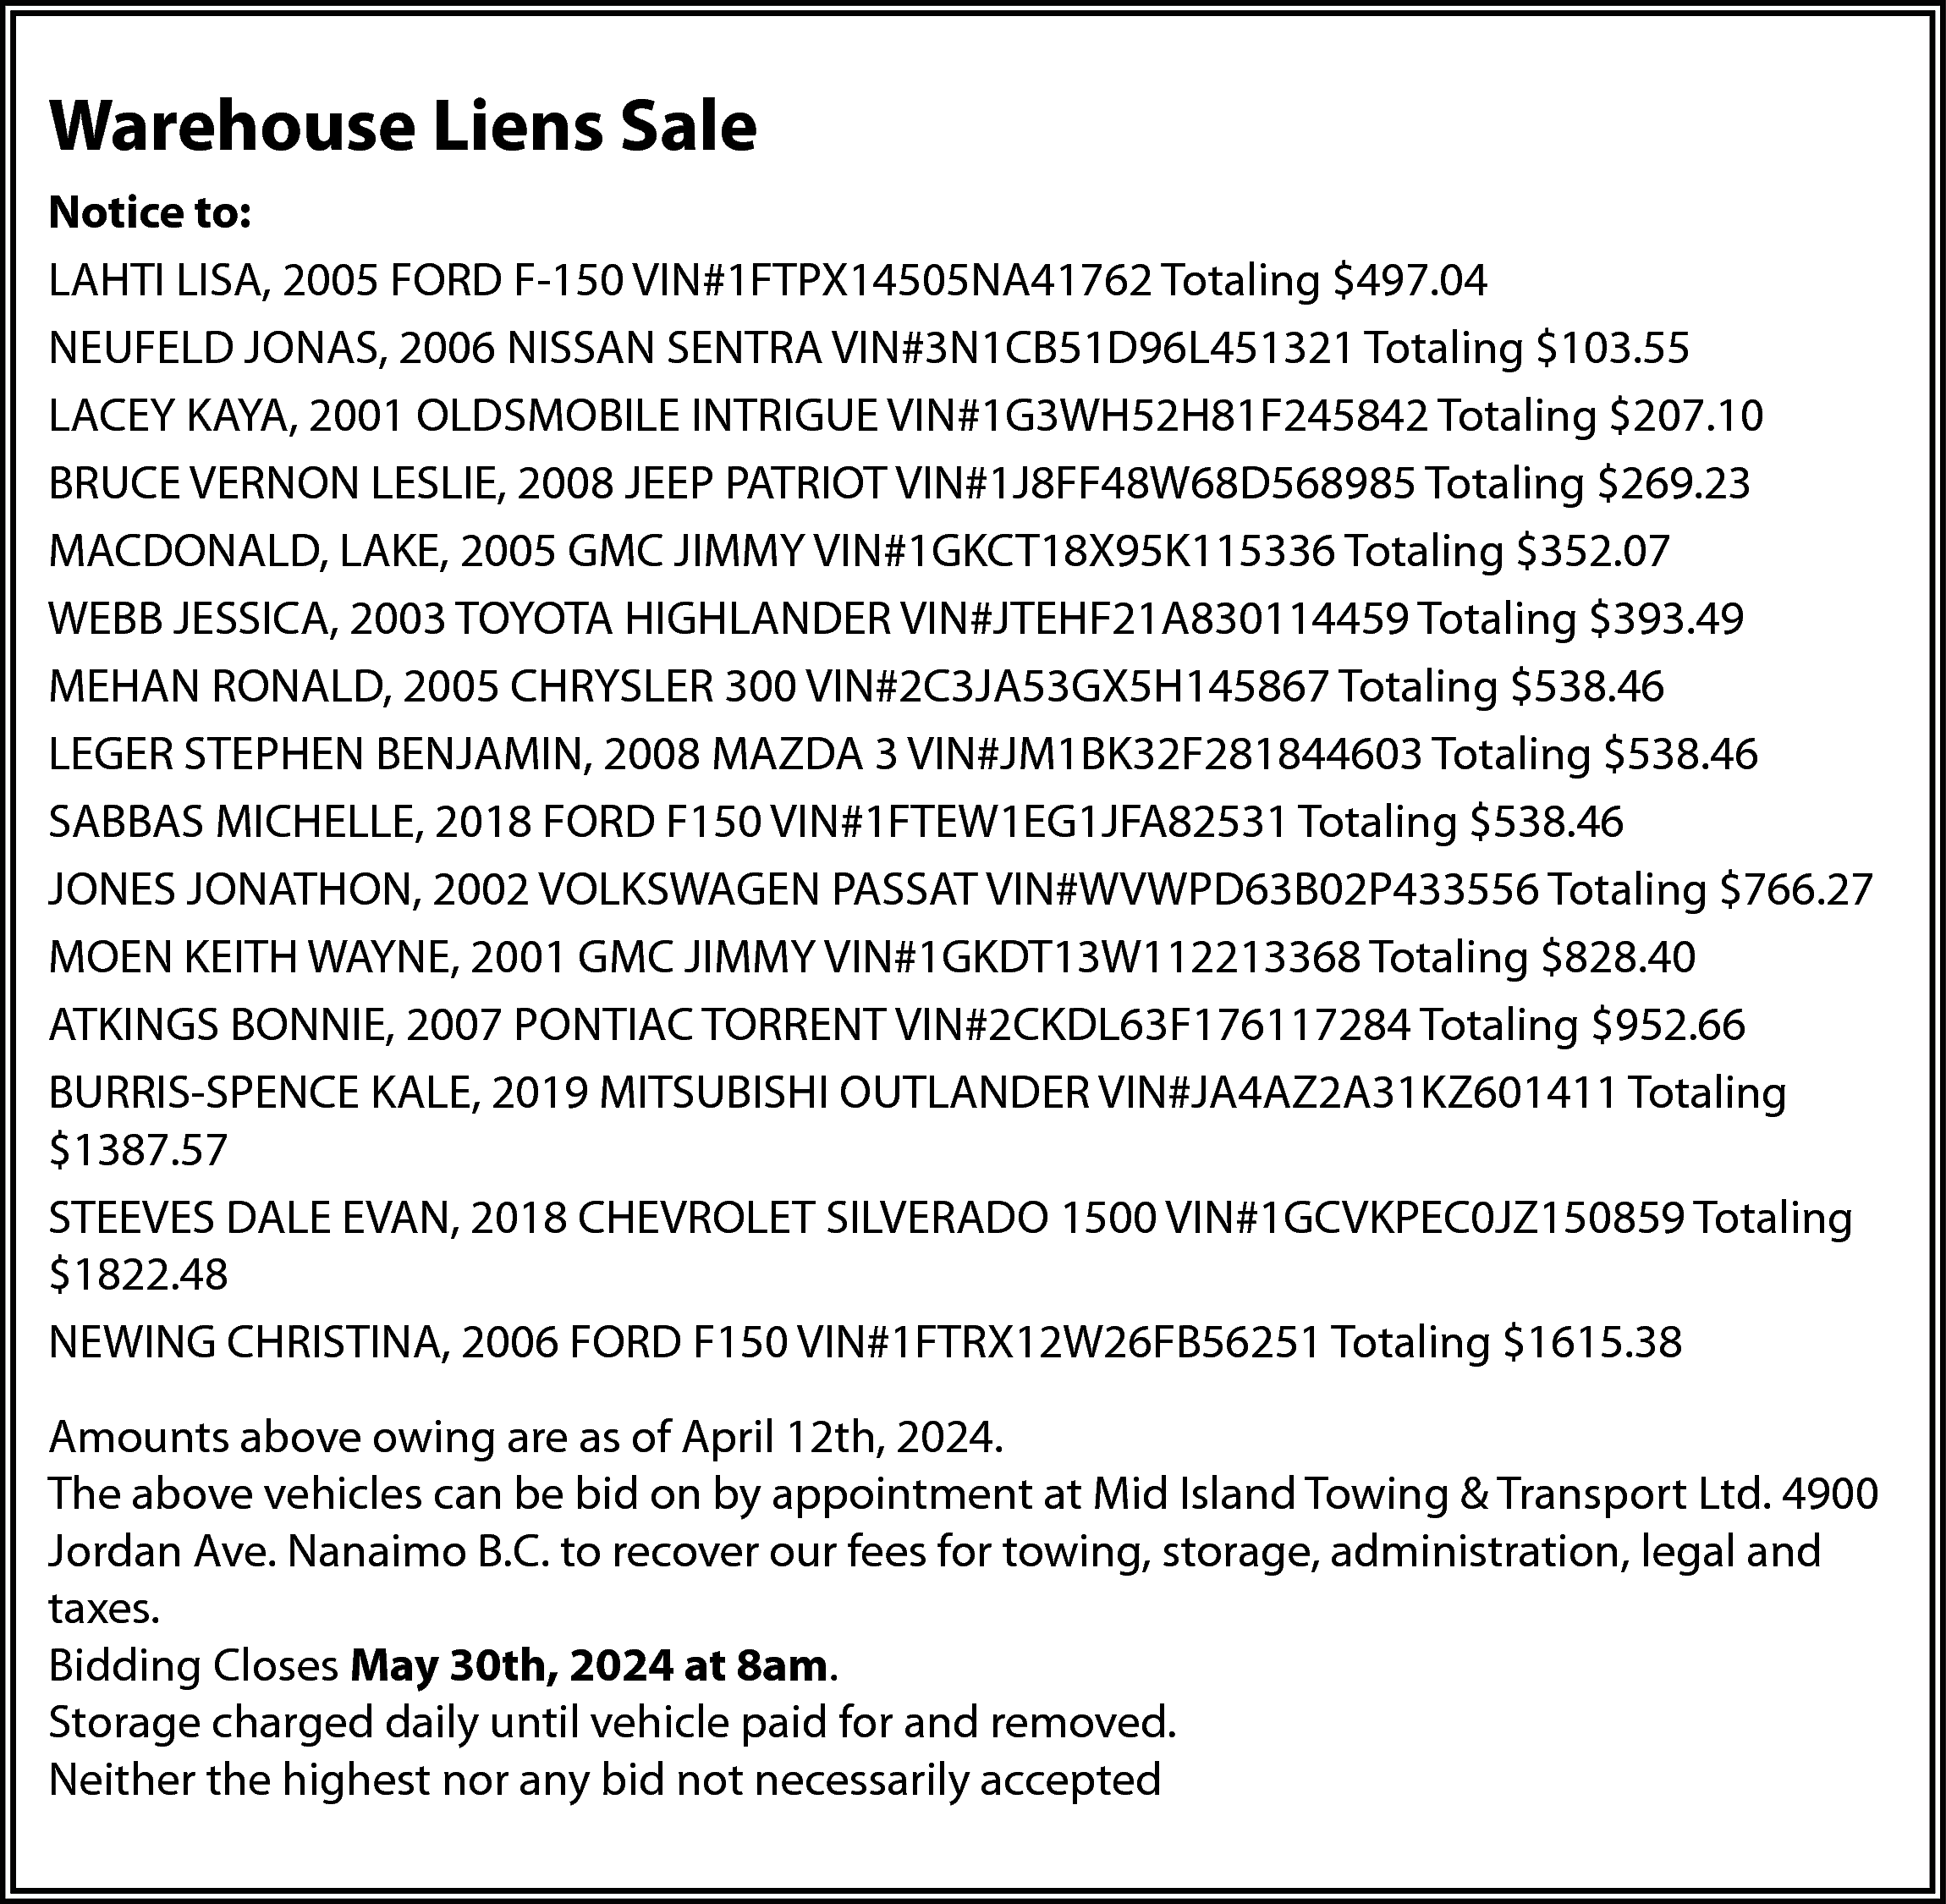 Warehouse Liens Sale <br>Notice to:  Warehouse Liens Sale  Notice to:  LAHTI LISA, 2005 FORD F-150 VIN#1FTPX14505NA41762 Totaling $497.04  NEUFELD JONAS, 2006 NISSAN SENTRA VIN#3N1CB51D96L451321 Totaling $103.55  LACEY KAYA, 2001 OLDSMOBILE INTRIGUE VIN#1G3WH52H81F245842 Totaling $207.10  BRUCE VERNON LESLIE, 2008 JEEP PATRIOT VIN#1J8FF48W68D568985 Totaling $269.23  MACDONALD, LAKE, 2005 GMC JIMMY VIN#1GKCT18X95K115336 Totaling $352.07  WEBB JESSICA, 2003 TOYOTA HIGHLANDER VIN#JTEHF21A830114459 Totaling $393.49  MEHAN RONALD, 2005 CHRYSLER 300 VIN#2C3JA53GX5H145867 Totaling $538.46  LEGER STEPHEN BENJAMIN, 2008 MAZDA 3 VIN#JM1BK32F281844603 Totaling $538.46  SABBAS MICHELLE, 2018 FORD F150 VIN#1FTEW1EG1JFA82531 Totaling $538.46  JONES JONATHON, 2002 VOLKSWAGEN PASSAT VIN#WVWPD63B02P433556 Totaling $766.27  MOEN KEITH WAYNE, 2001 GMC JIMMY VIN#1GKDT13W112213368 Totaling $828.40  ATKINGS BONNIE, 2007 PONTIAC TORRENT VIN#2CKDL63F176117284 Totaling $952.66  BURRIS-SPENCE KALE, 2019 MITSUBISHI OUTLANDER VIN#JA4AZ2A31KZ601411 Totaling  $1387.57  STEEVES DALE EVAN, 2018 CHEVROLET SILVERADO 1500 VIN#1GCVKPEC0JZ150859 Totaling  $1822.48  NEWING CHRISTINA, 2006 FORD F150 VIN#1FTRX12W26FB56251 Totaling $1615.38  Amounts above owing are as of April 12th, 2024.  The above vehicles can be bid on by appointment at Mid Island Towing & Transport Ltd. 4900  Jordan Ave. Nanaimo B.C. to recover our fees for towing, storage, administration, legal and  taxes.  Bidding Closes May 30th, 2024 at 8am.  Storage charged daily until vehicle paid for and removed.  Neither the highest nor any bid not necessarily accepted    